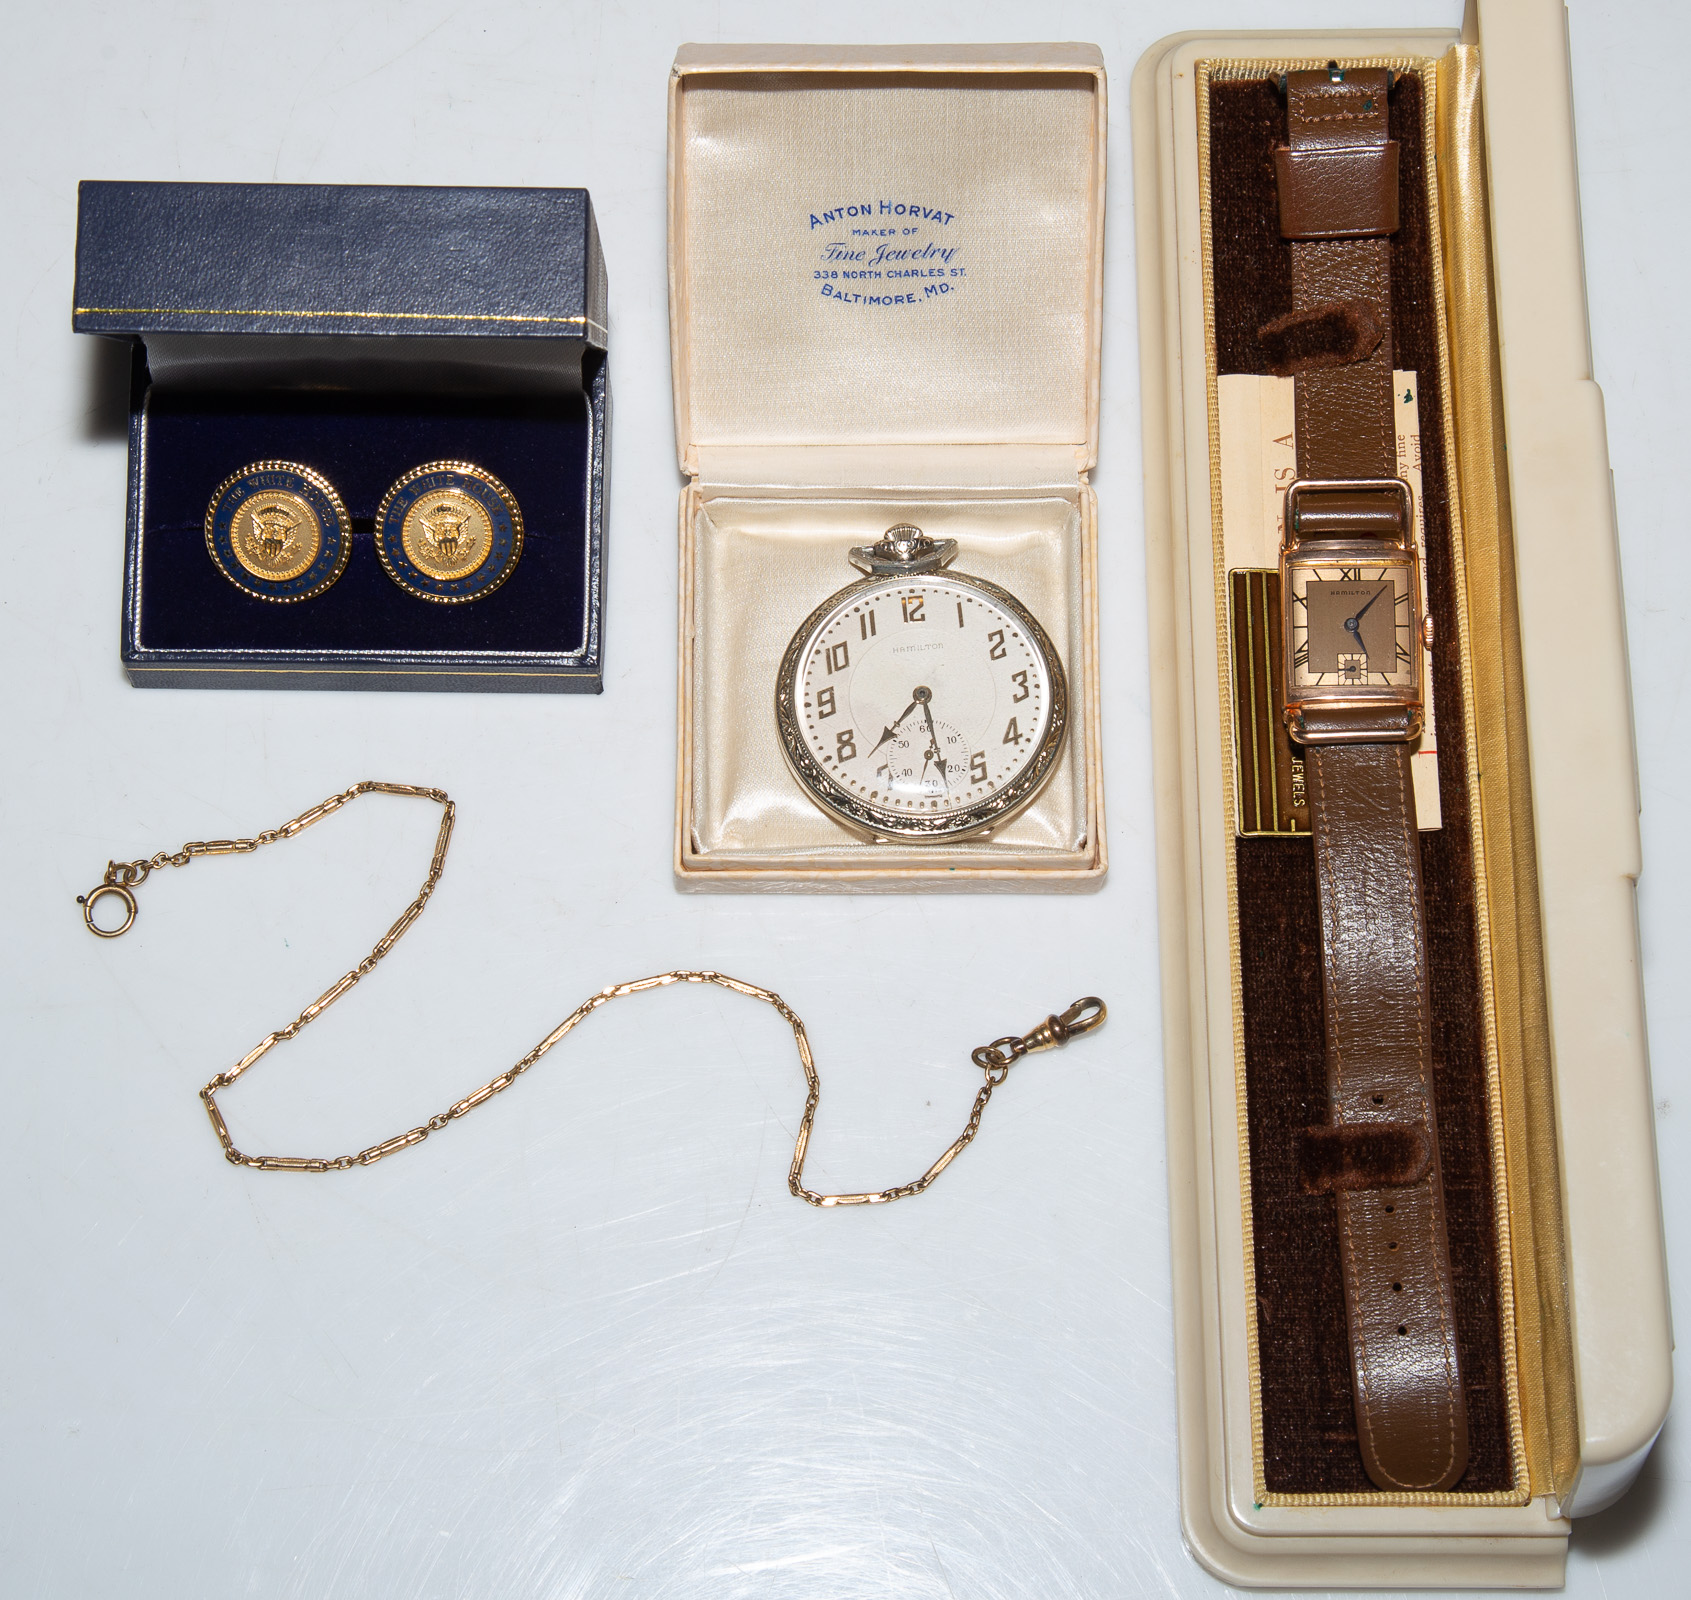 TWO HAMILTON WATCHES ONE 14K GOLD FILLED  31066f